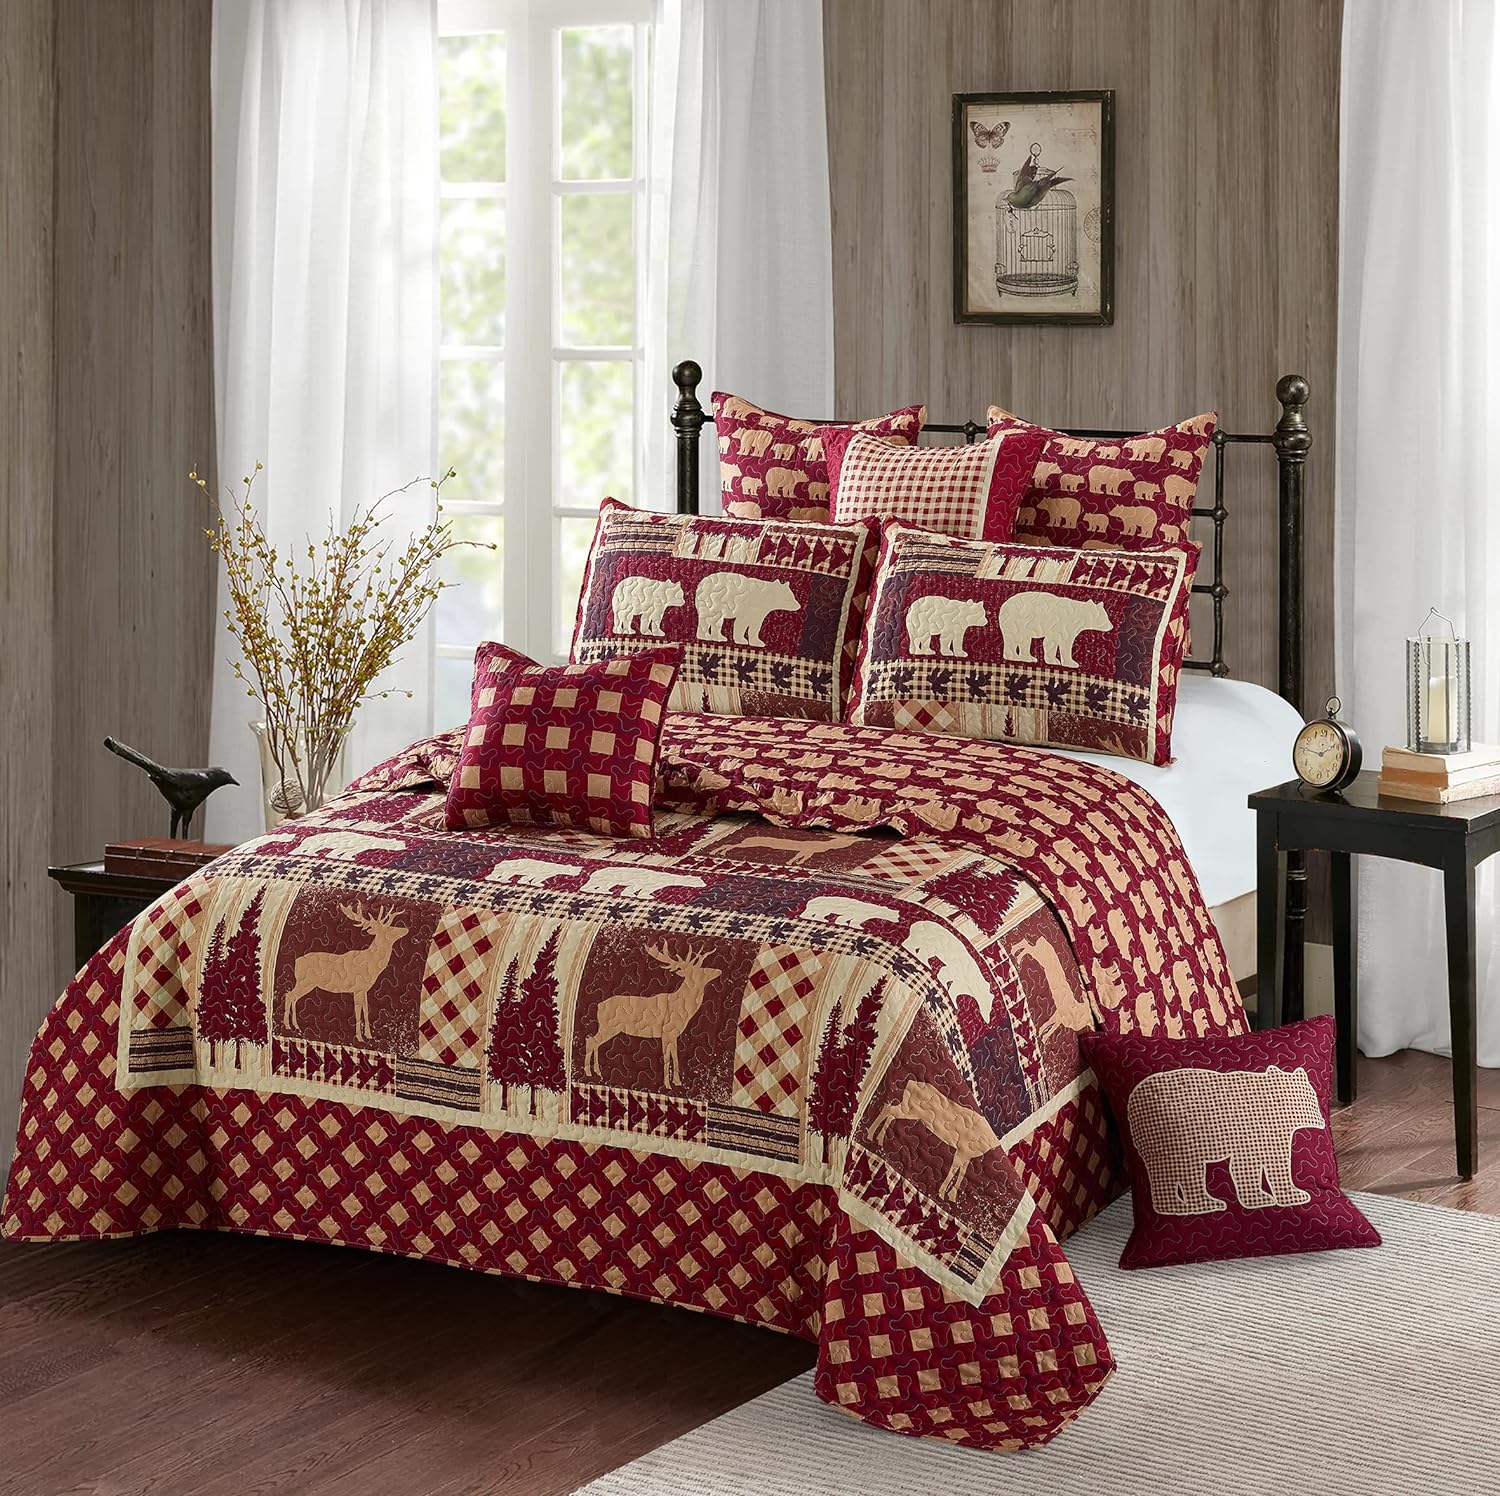 Virah Bella 3 Piece King Cabin Quilt Bedding Set - Autumn Forest - Rustic Country Reversible Patchwork Comforter Set with Decorative Pillow Shams